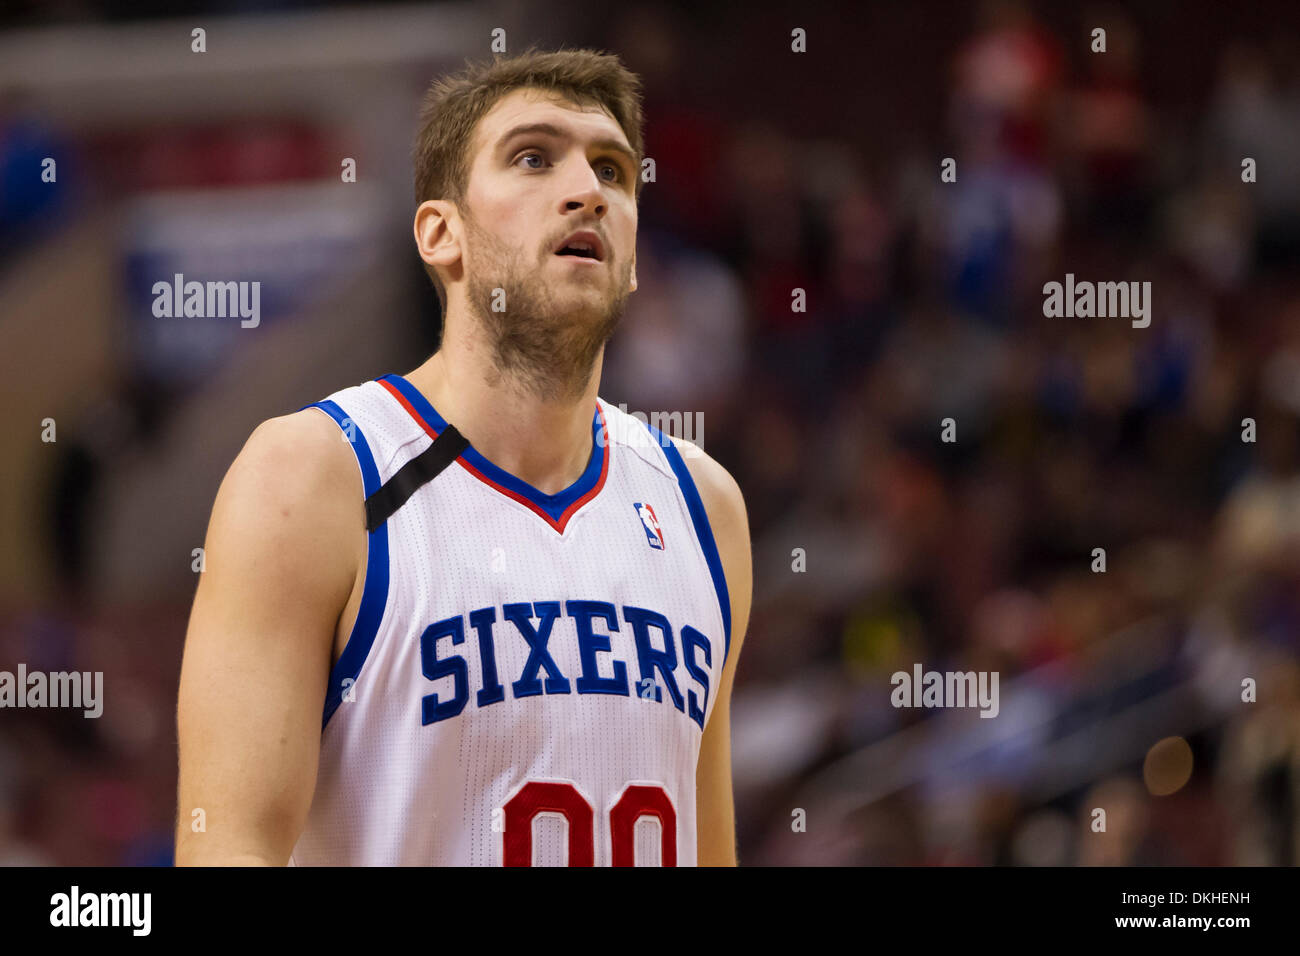 December 3, 2013: Philadelphia 76ers center Spencer Hawes (00) looks on during the NBA game between the Orlando Magic and the Philadelphia 76ers at the Wells Fargo Center in Philadelphia, Pennsylvania. The 76ers win 126-125 in double overtime. (Christopher Szagola/Cal Sport Media) Stock Photo